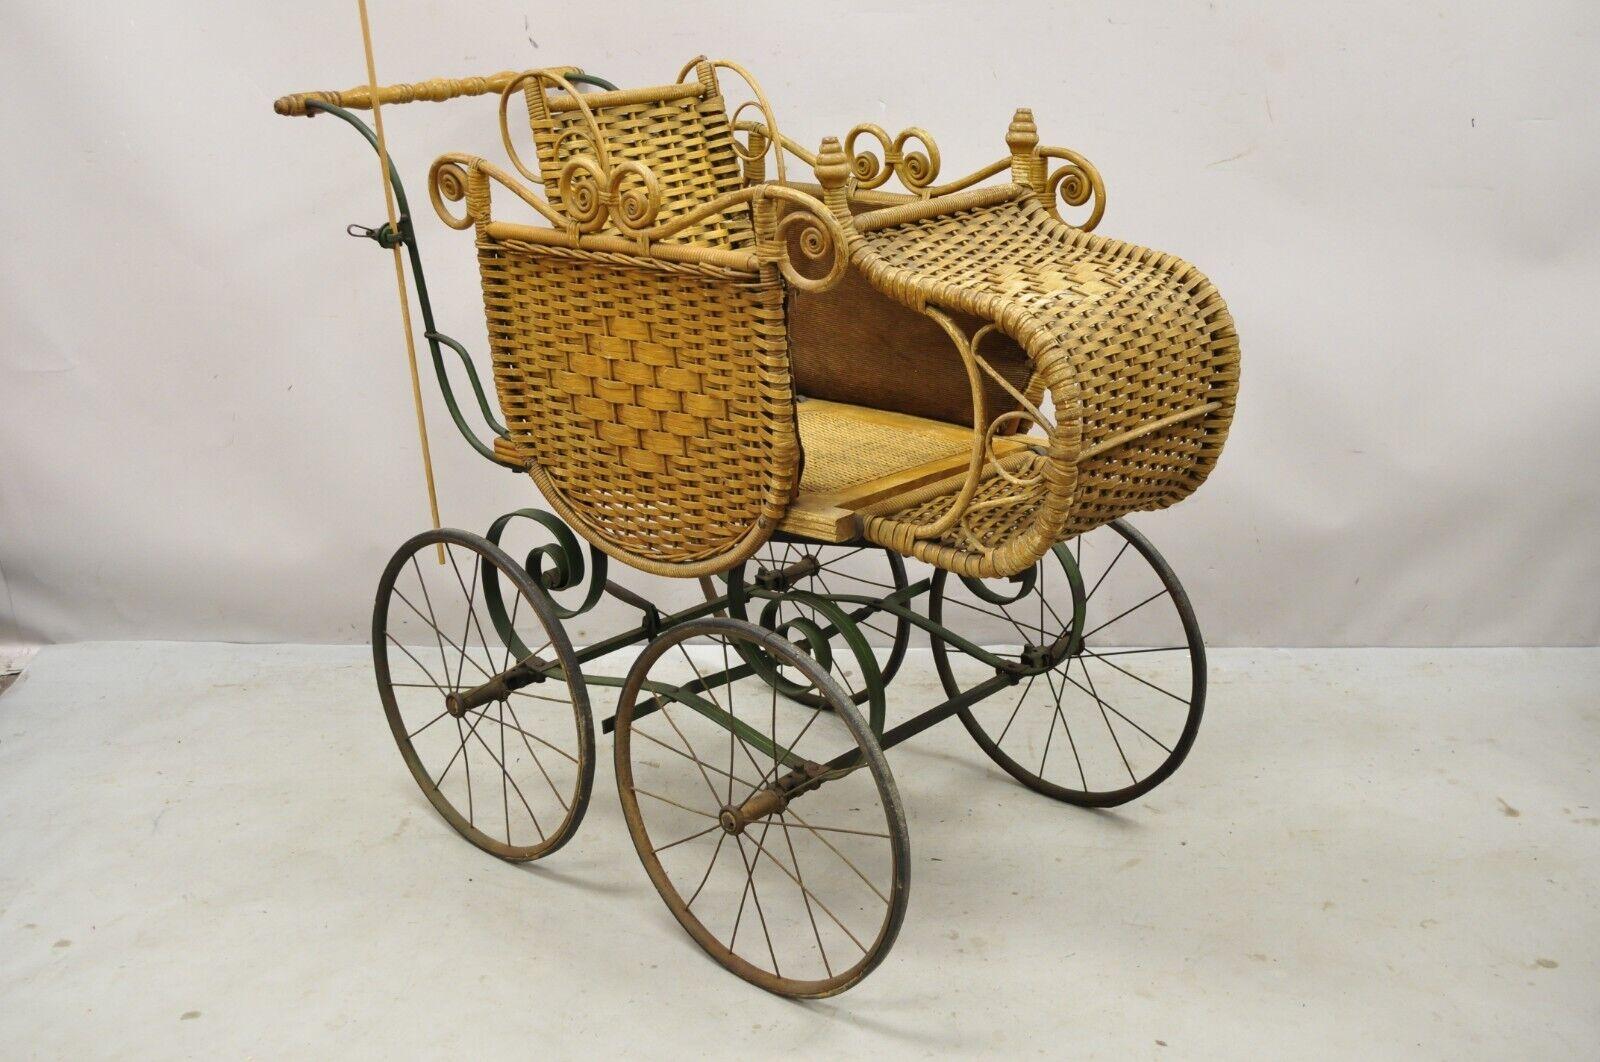 Antique victorian Wicker vintage baby buggy stroller carriage full size. Item features an adjustable footrest, wicker frame, wooden handle, removal parasol umbrella, very nice antique item, quality American craftsmanship, great style and form, circa